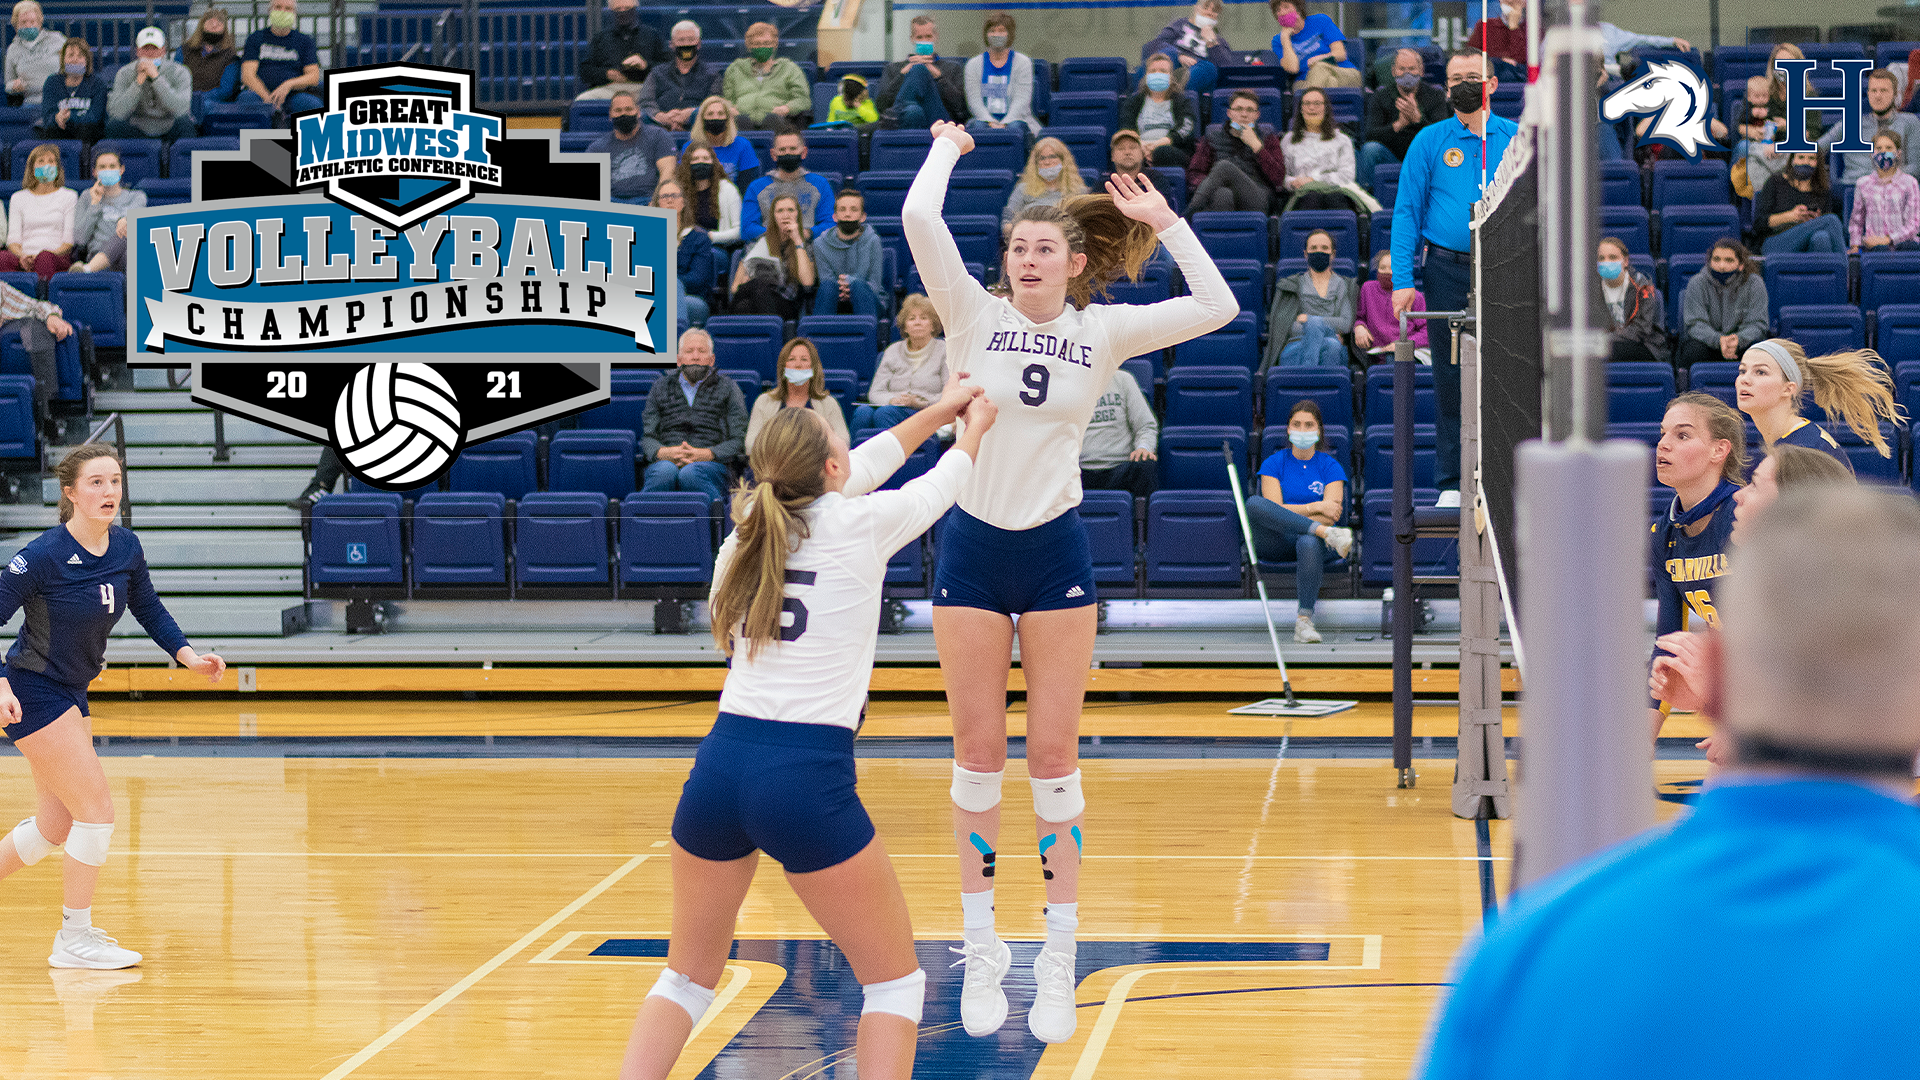 Top-seeded Chargers advance past No. 4 Cedarville in G-MAC Tournament classic, 3-2